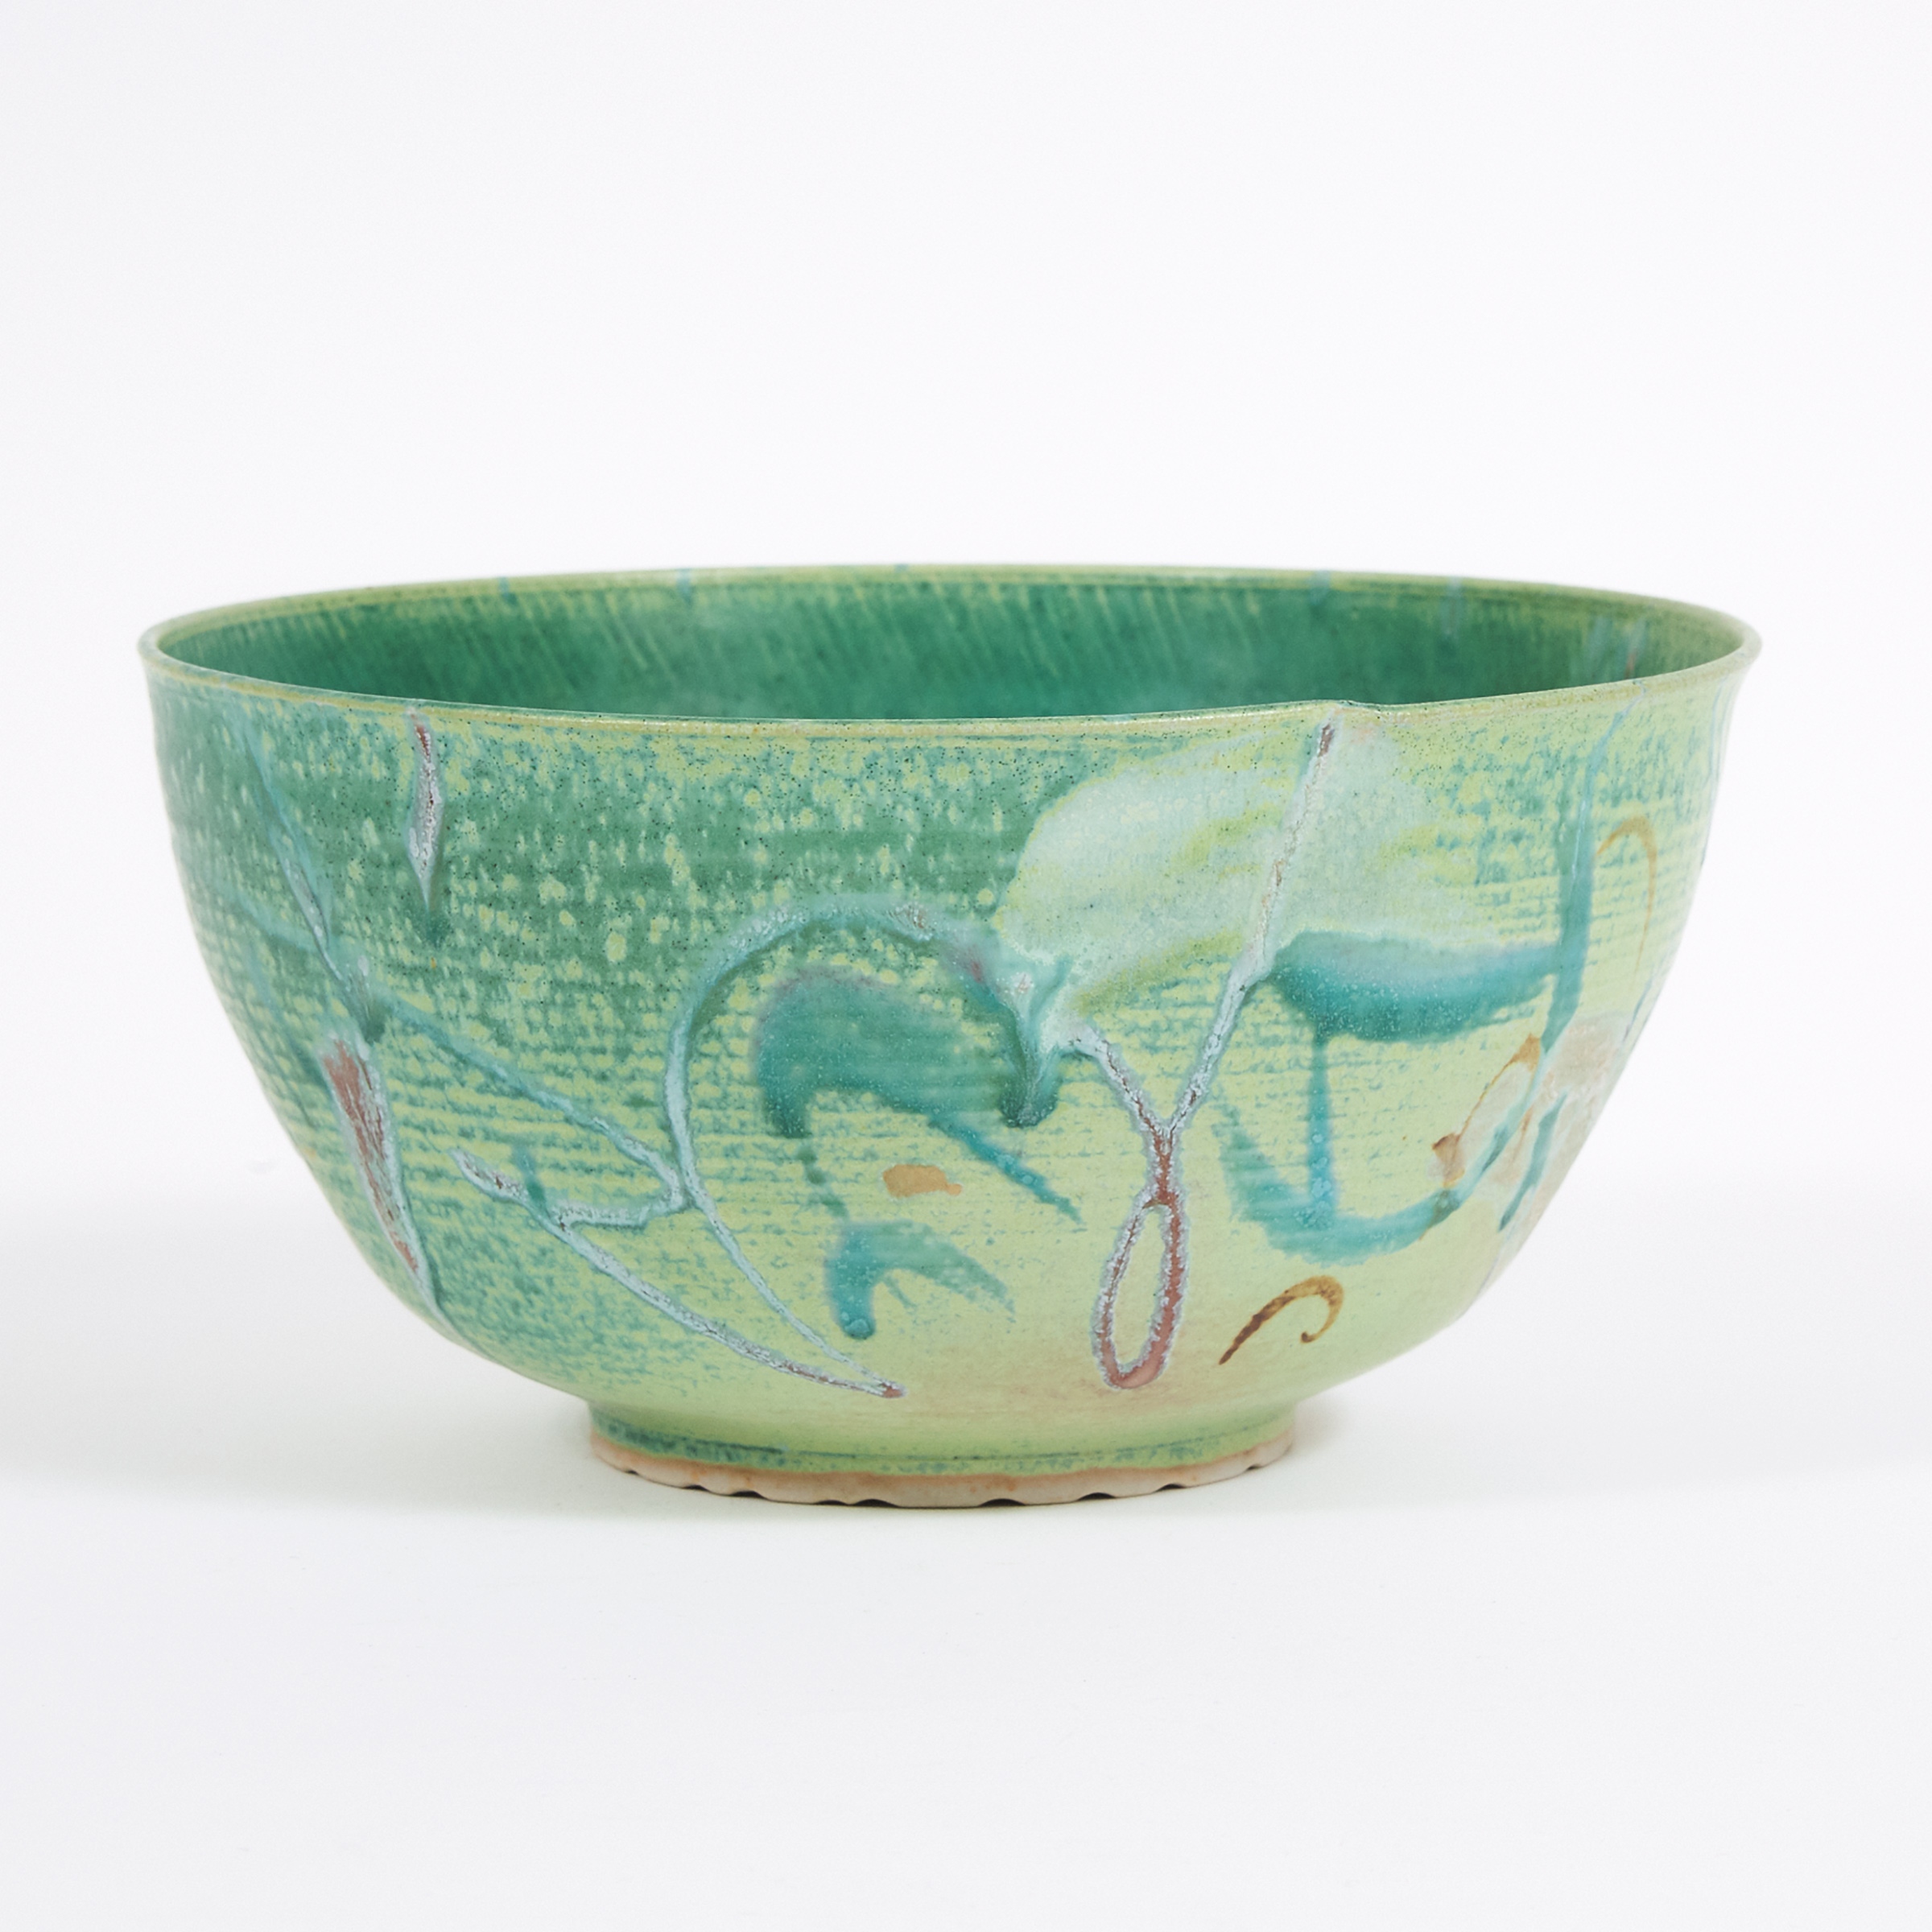 Kayo O'Young (Canadian, b.1950), Turquoise and Green Glazed Bowl, 1993